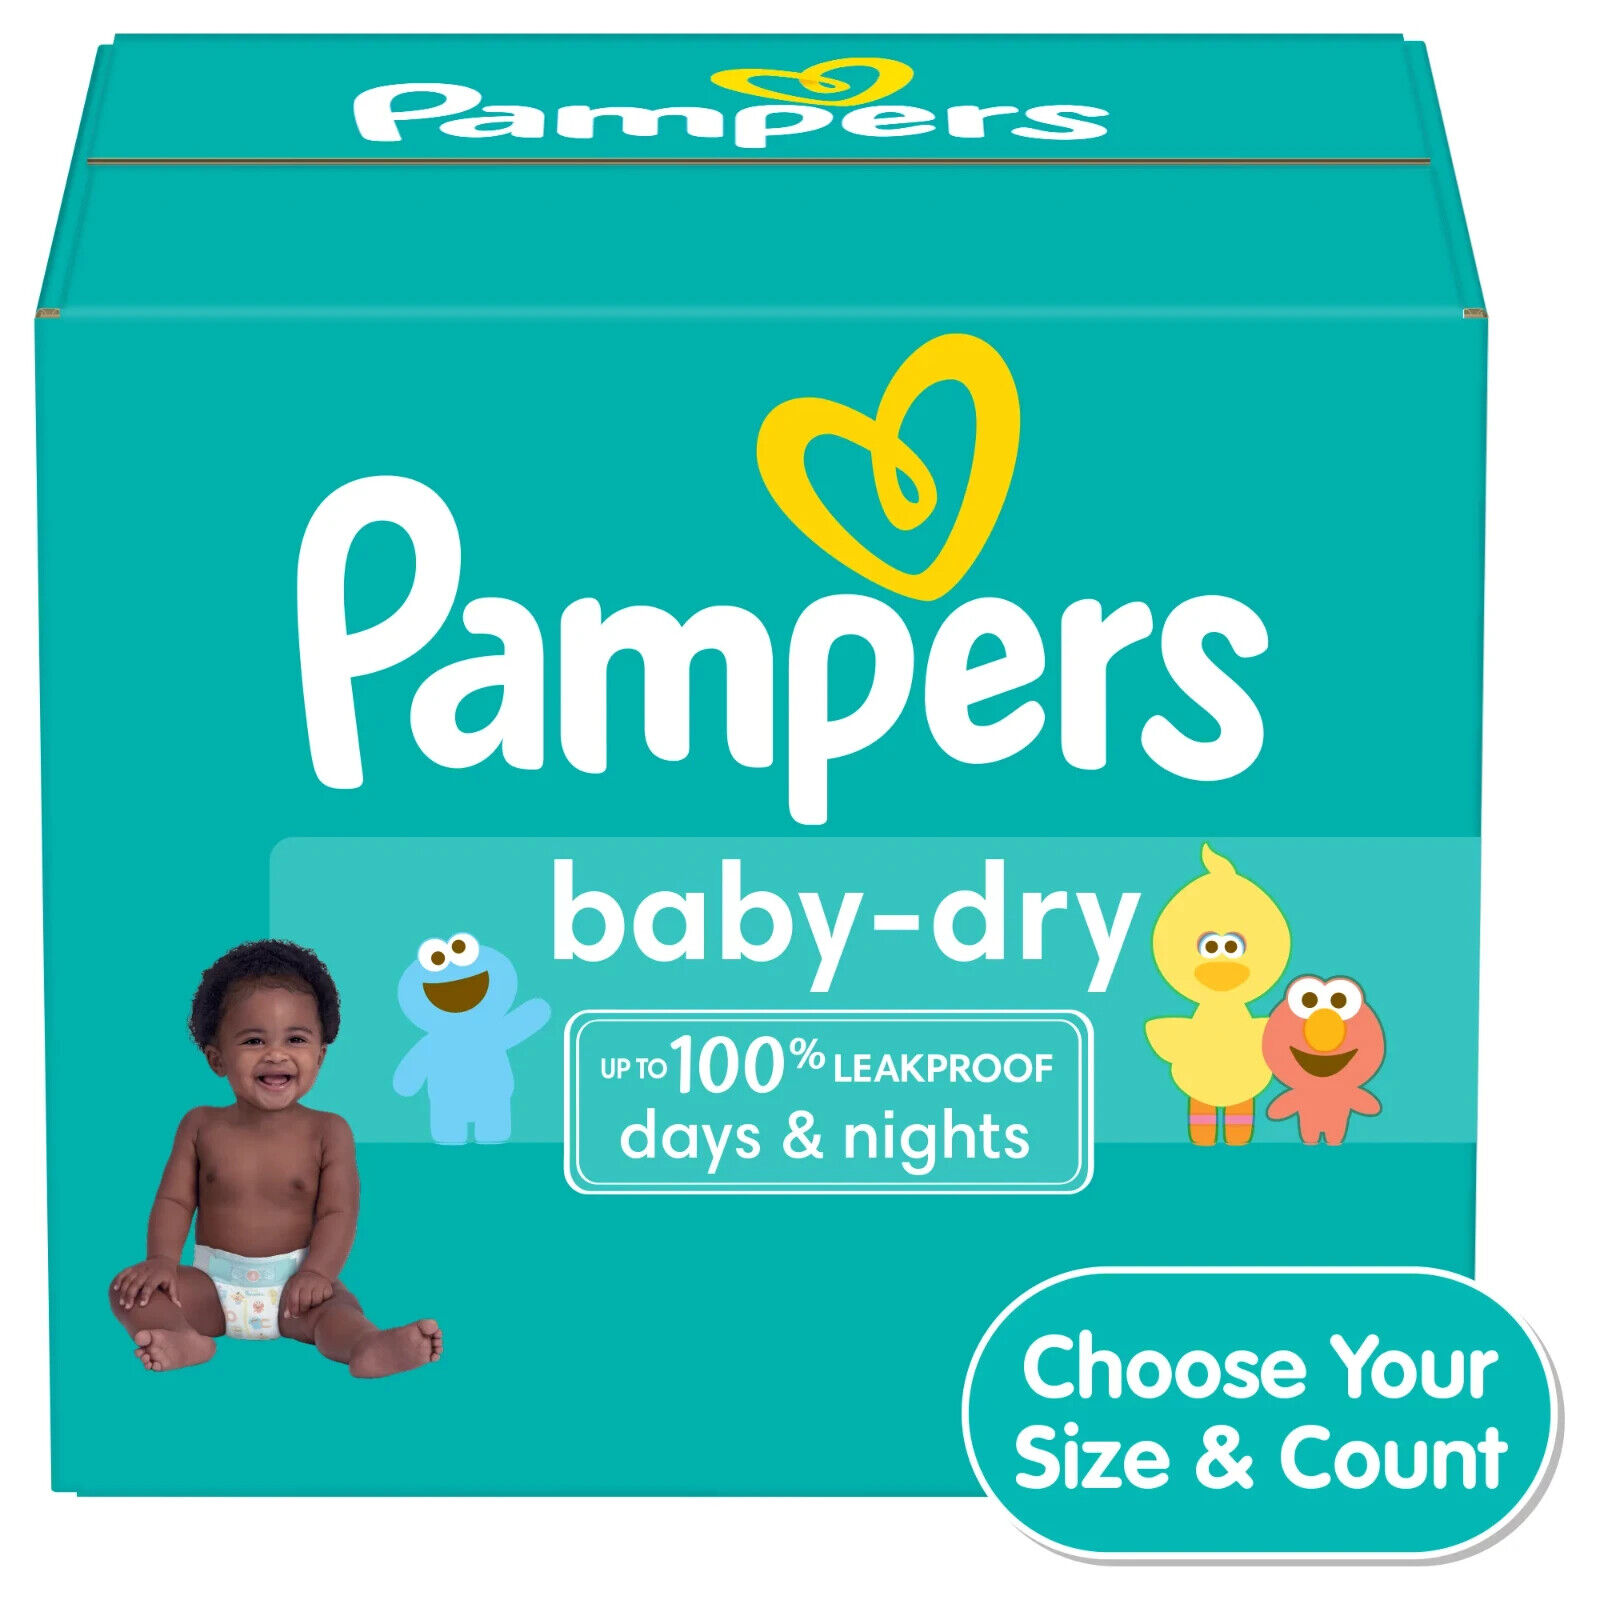 Pampers Baby Dry Diapers - Select Count & Size